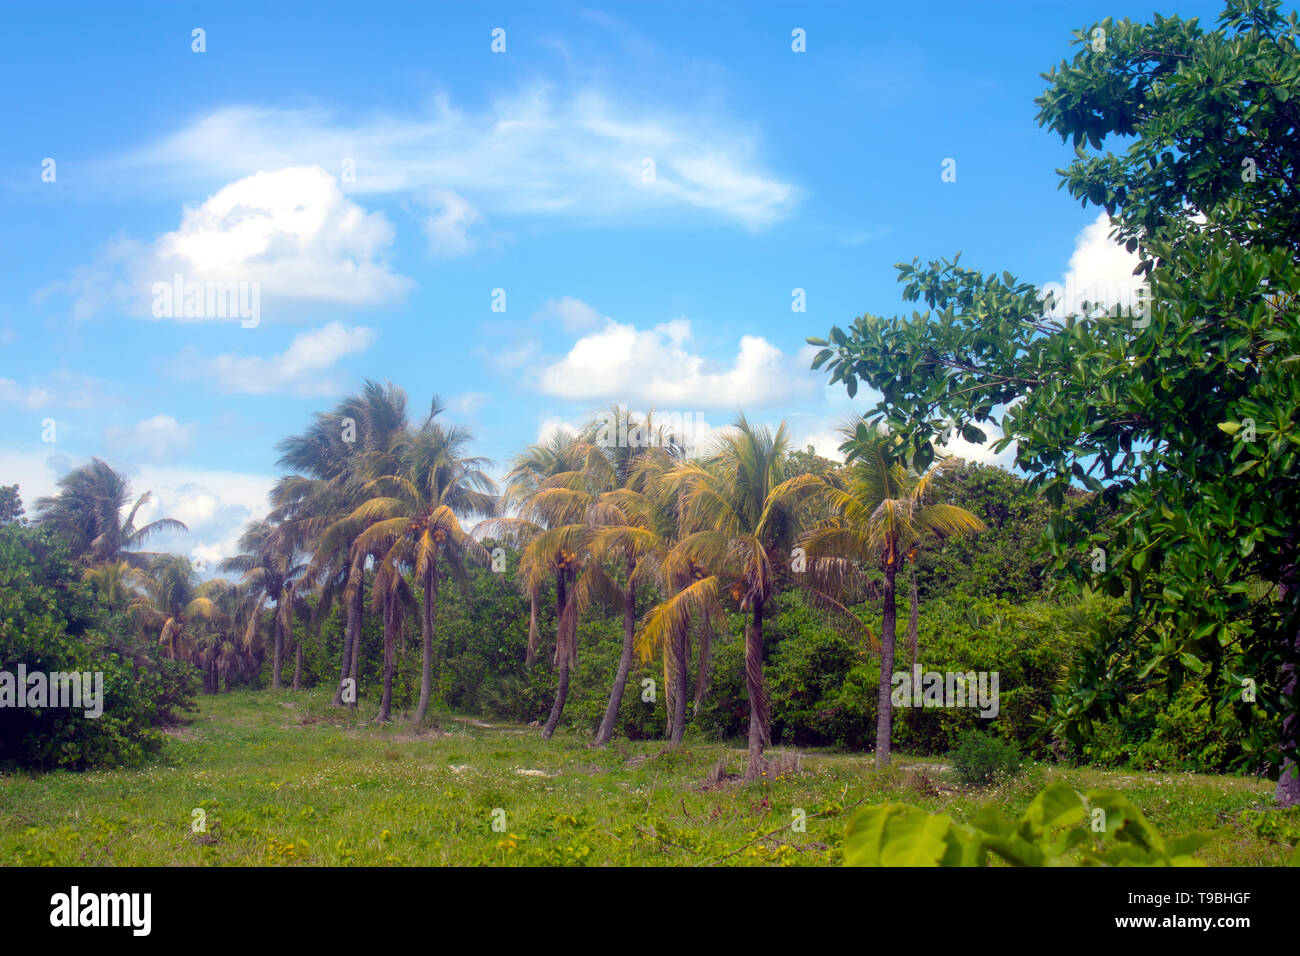 Beautiful palm trees in Jupiter Island, Florida, USA, on a warm and partly cloudy spring day Stock Photo